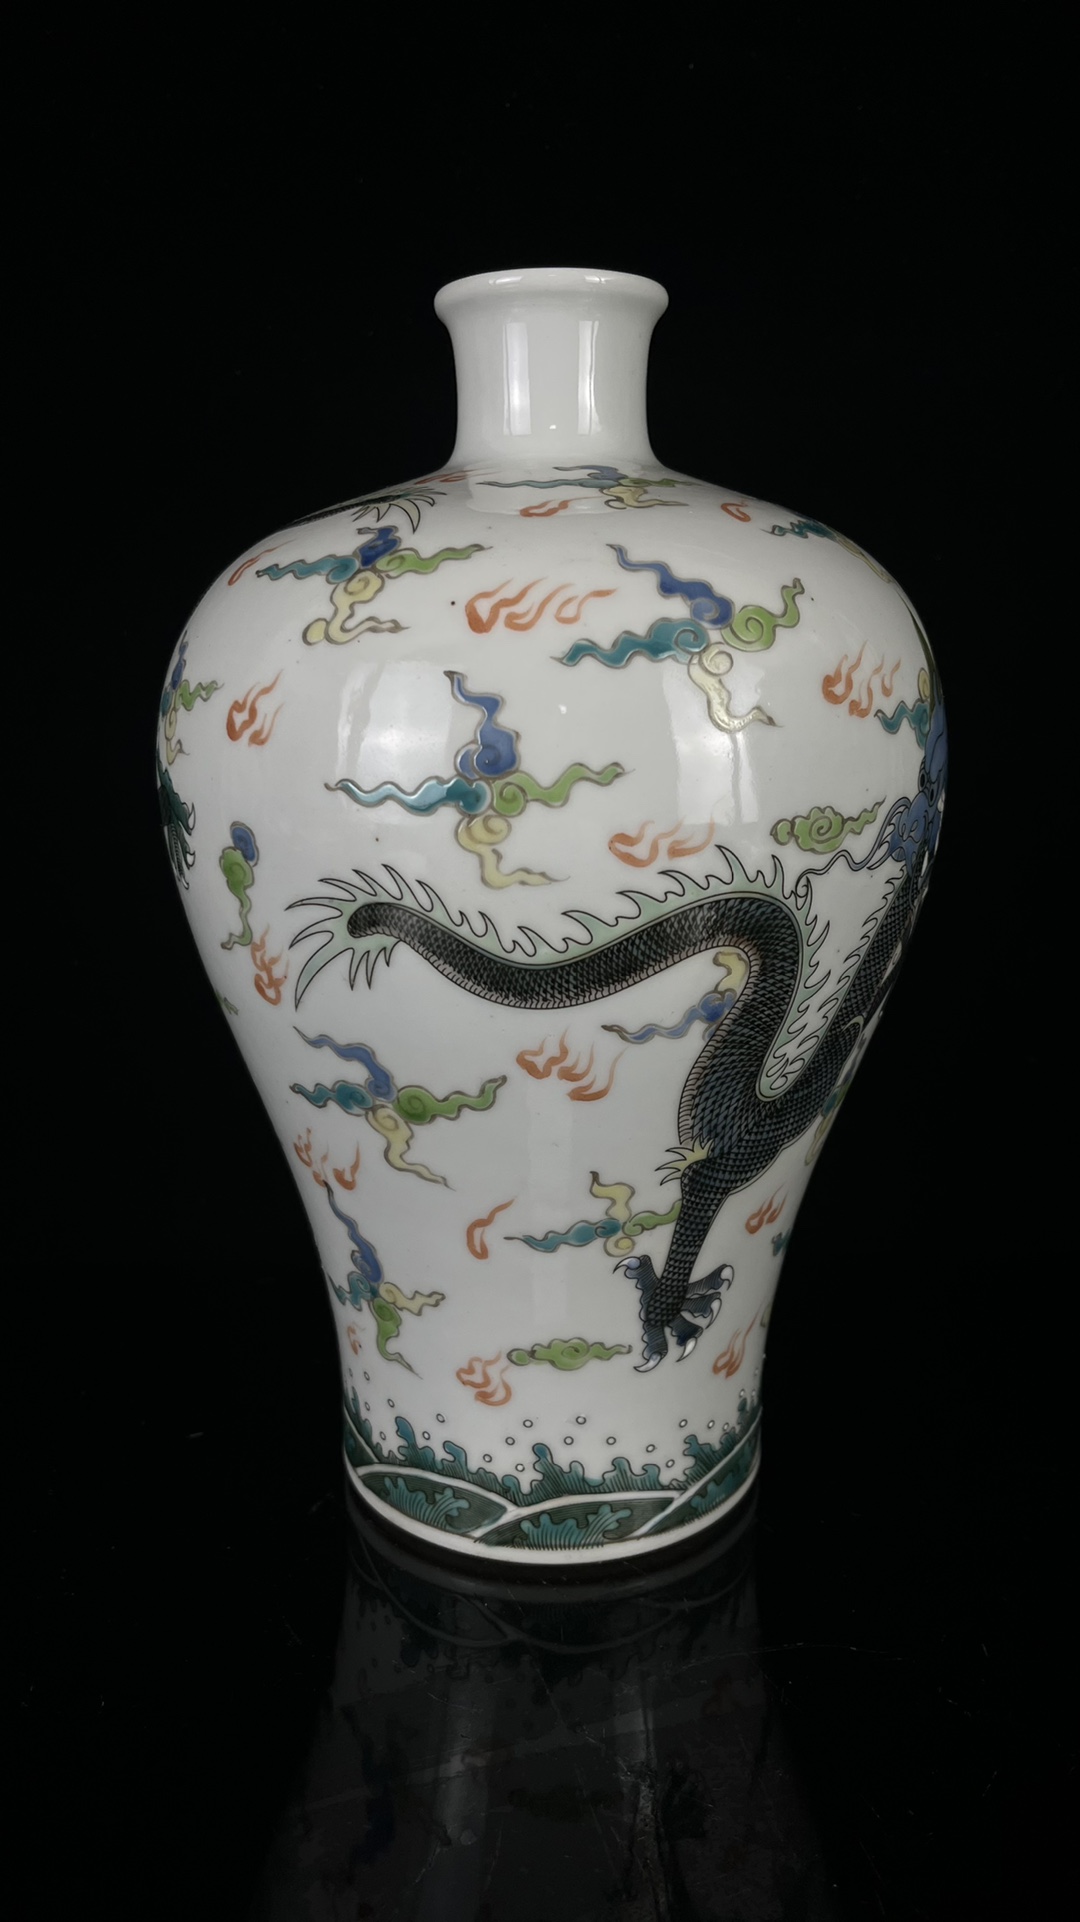 Five-color porcelain plate and dragon plum vase made in the Kangxi period of the Qing Dynasty - Image 6 of 8